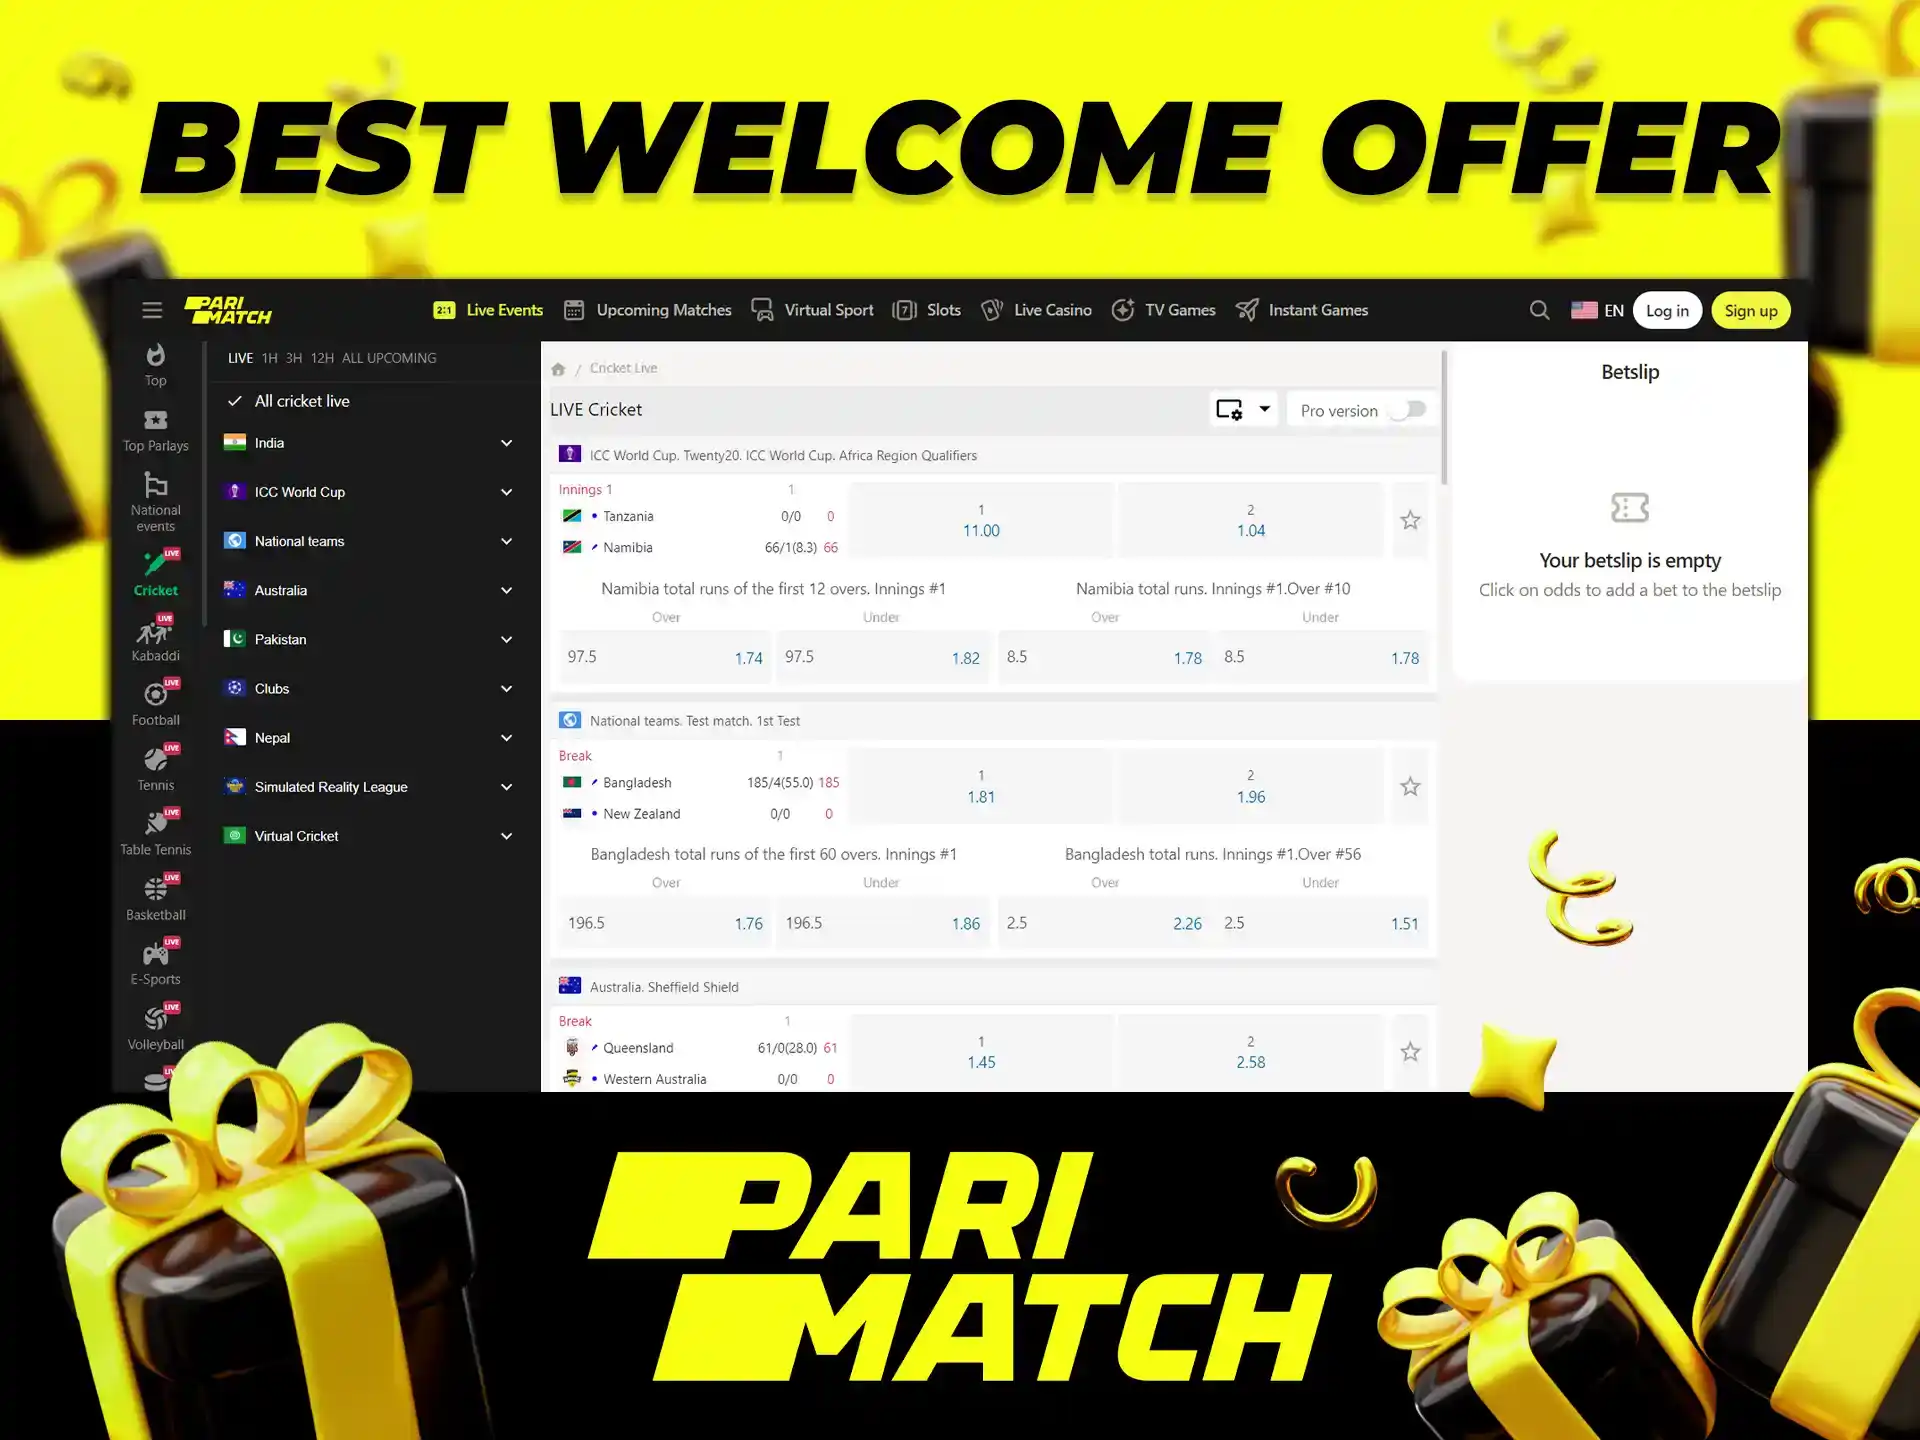 Parimatch gives new users the best welcome offers.